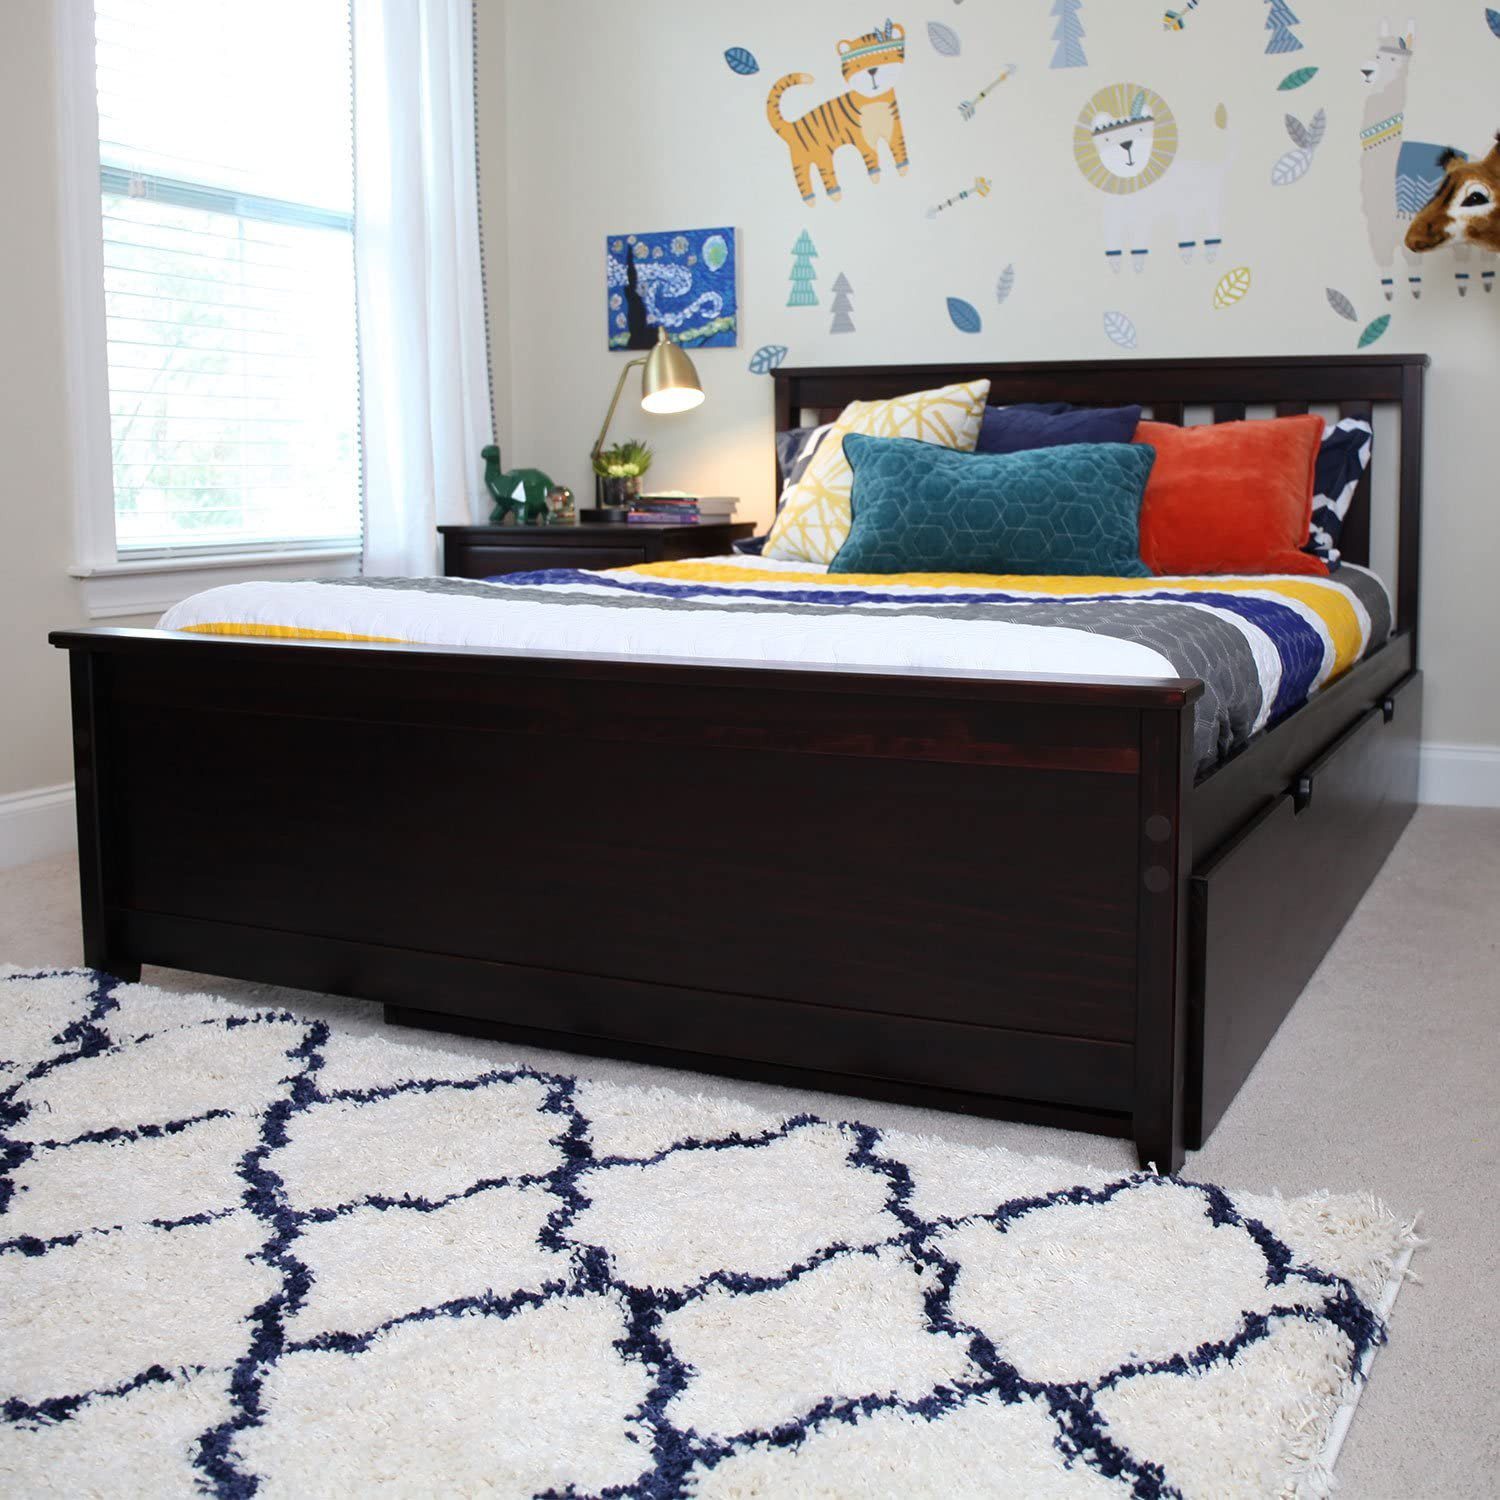 SOLID WOOD FULL SIZE PLATFORM BED IN ESPRESSO FINISH WITH TRUNDLE BED